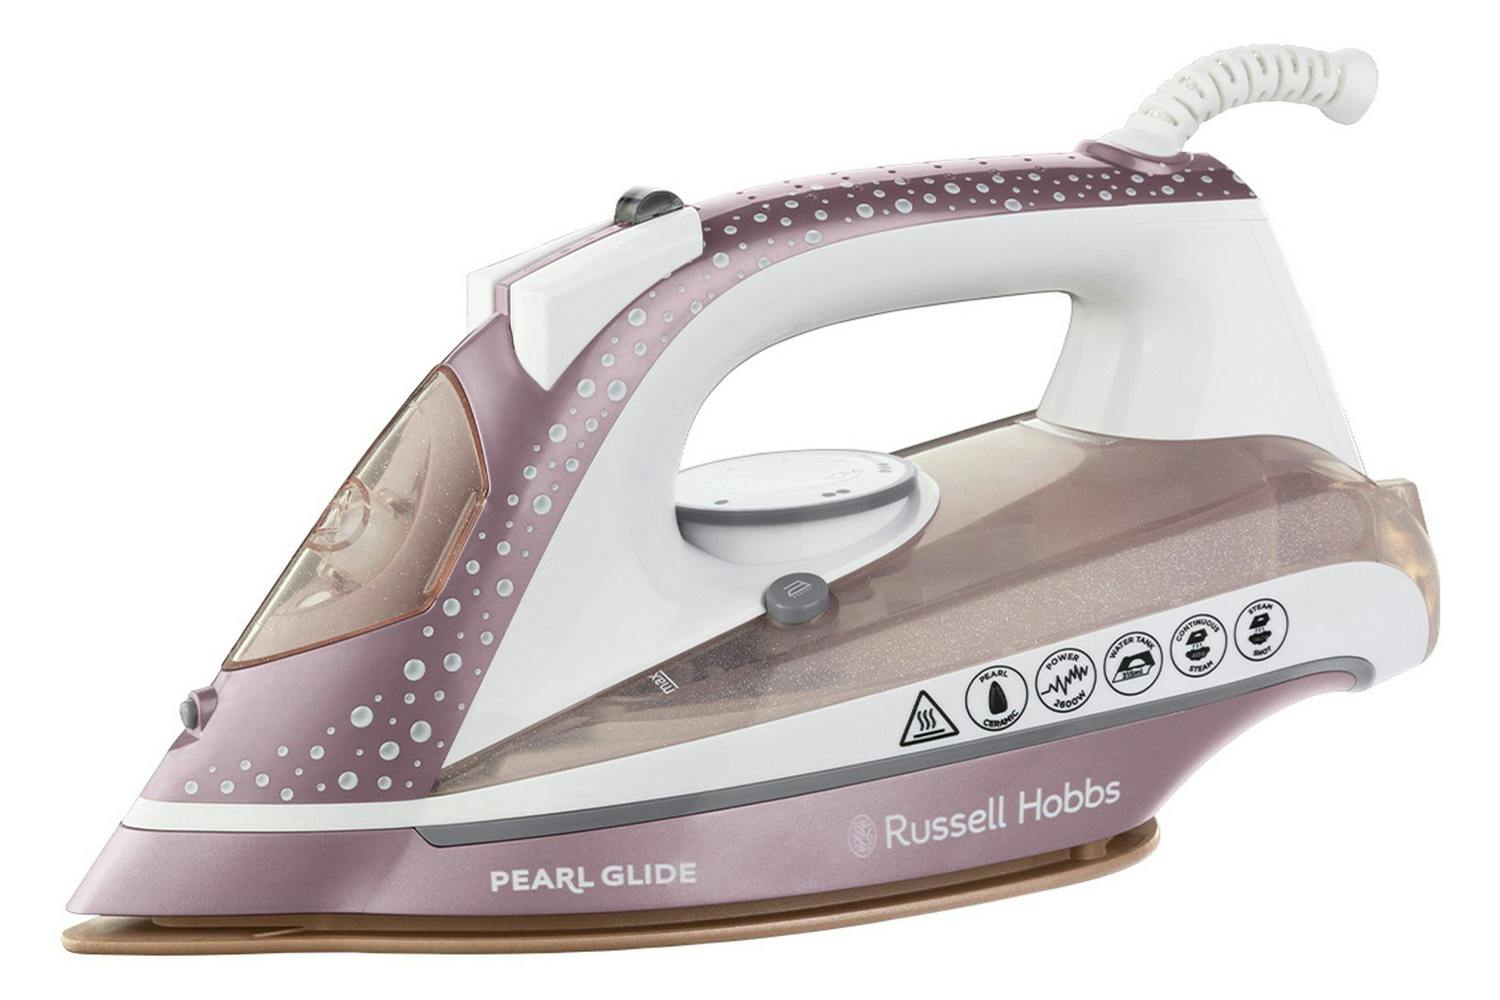 Russell Hobbs 2600W Pearl Glide Steam Iron | 23972 | Champagne